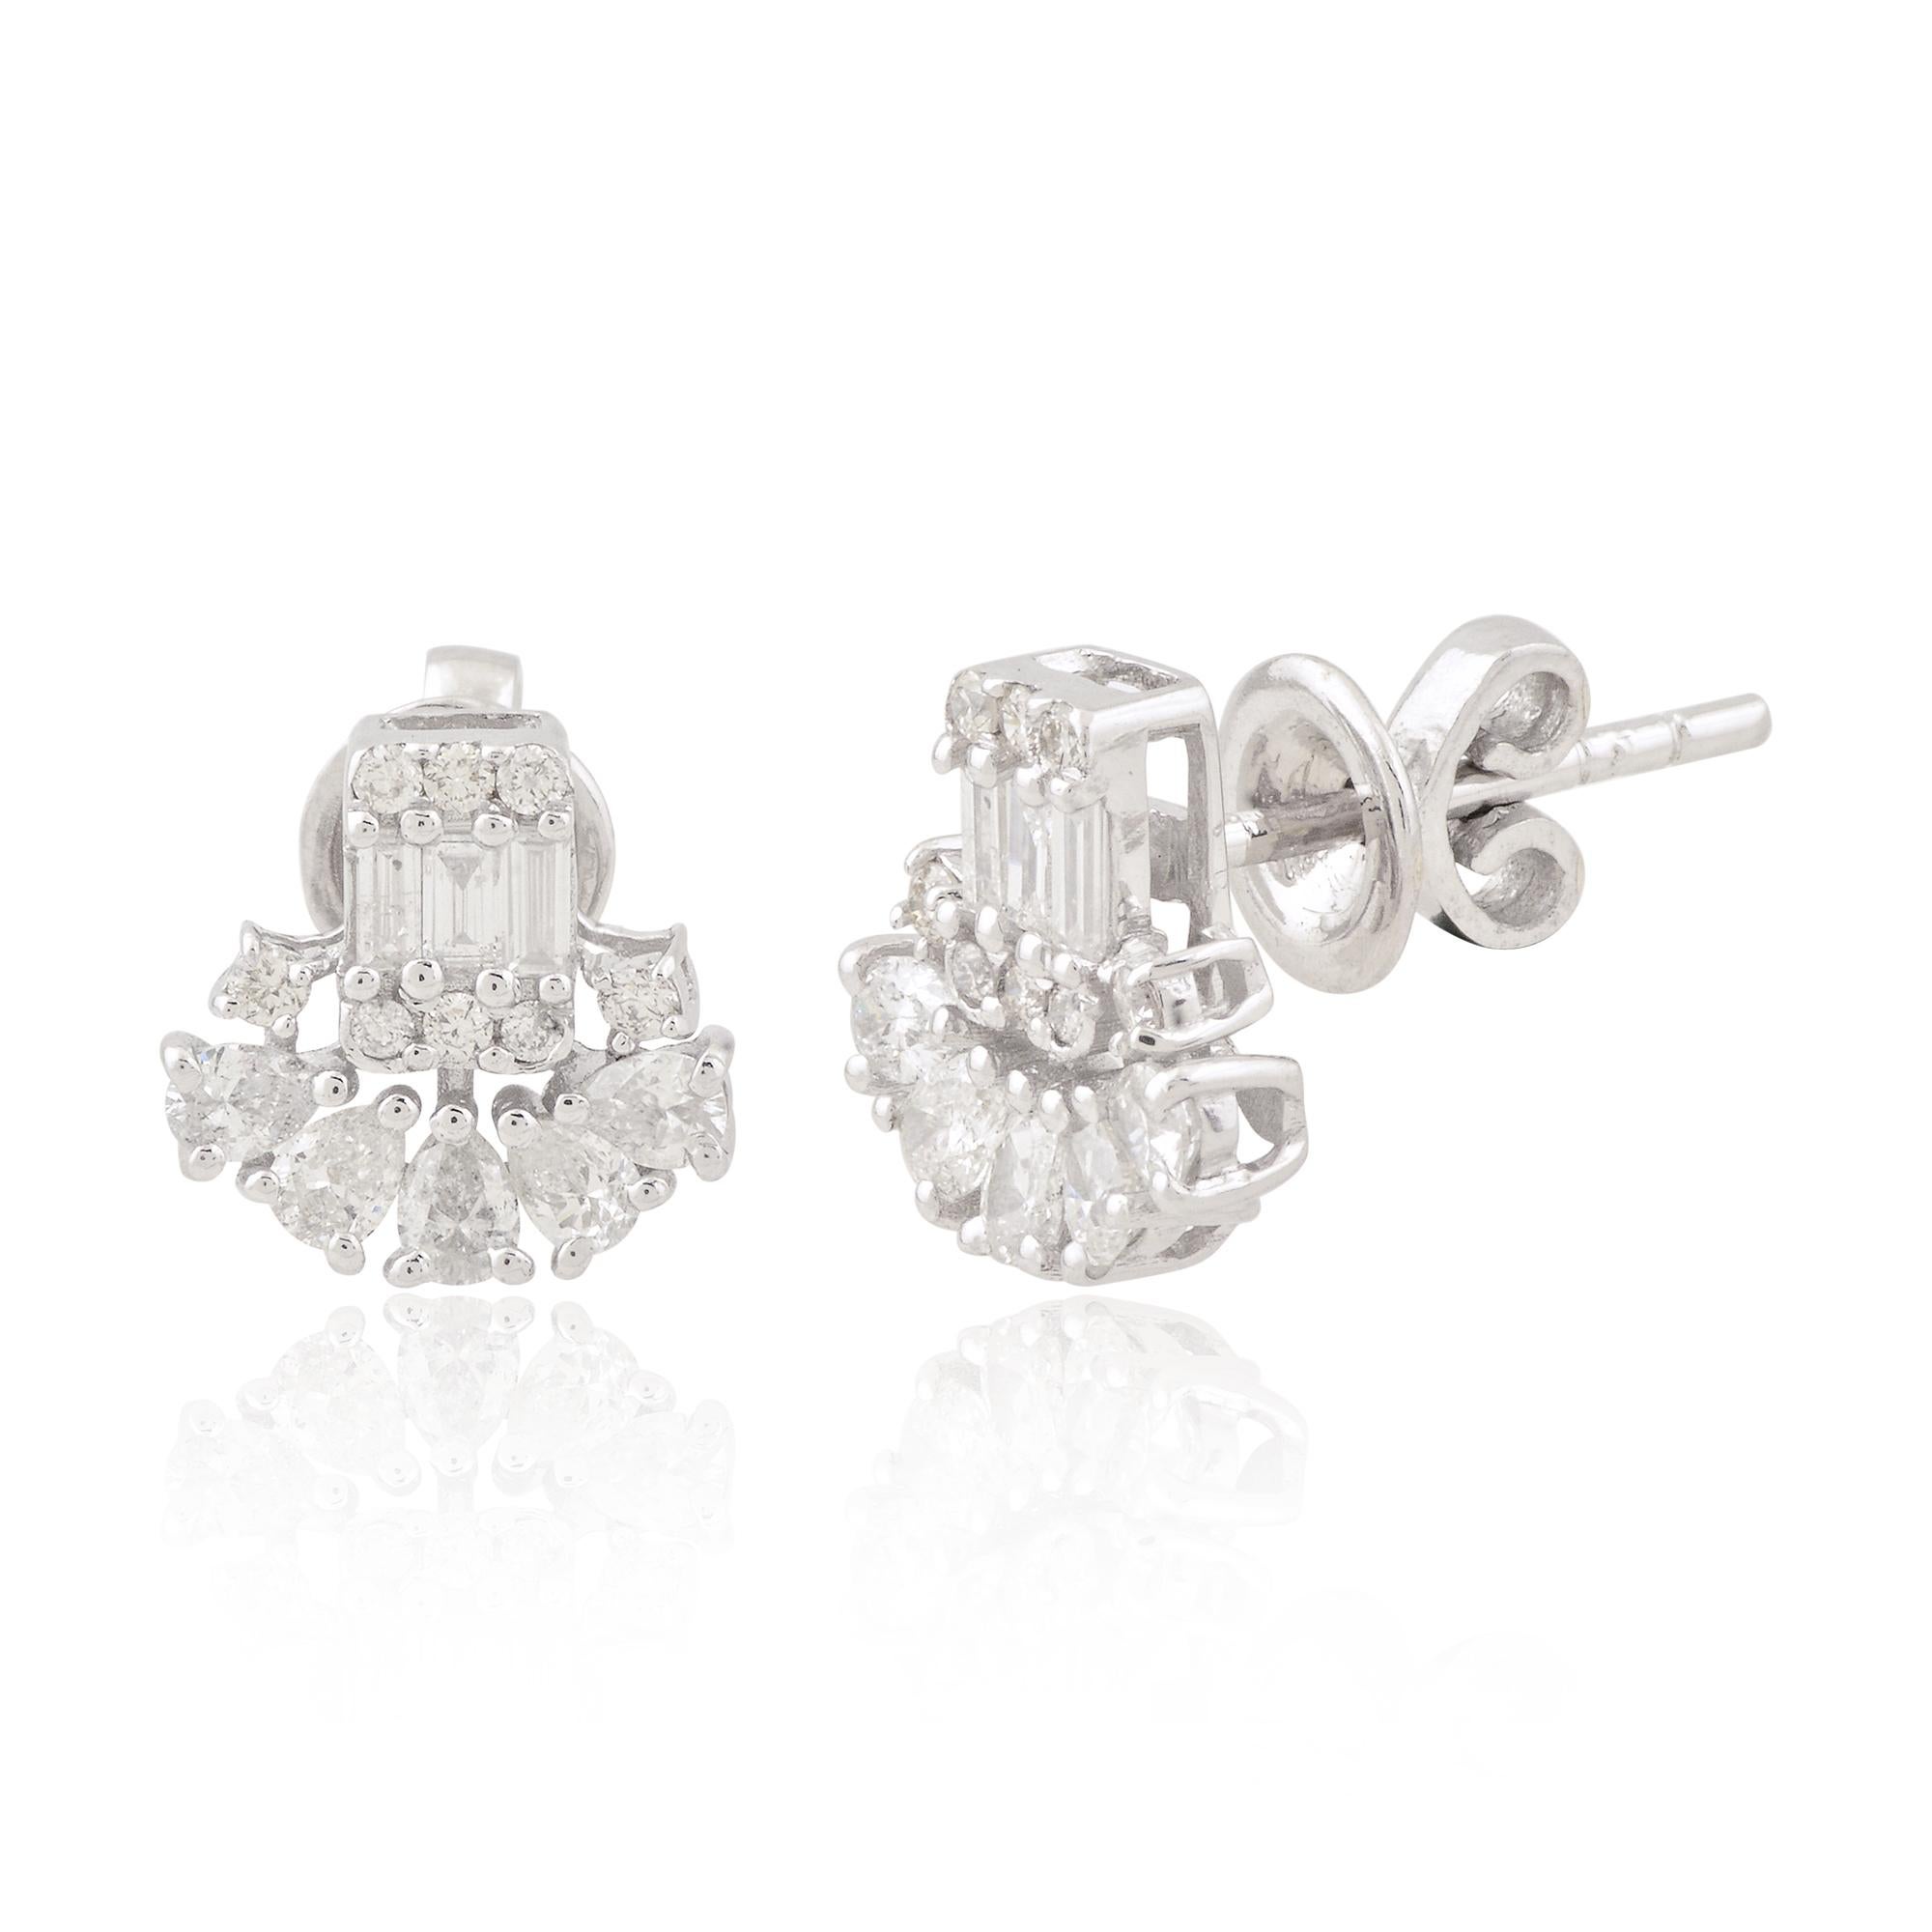 Each stud earring features a mesmerizing baguette-cut diamond, renowned for its sleek silhouette and captivating sparkle. Selected for their superior quality, these diamonds boast a clarity grade of SI (Slightly Included) and a color grade of HI